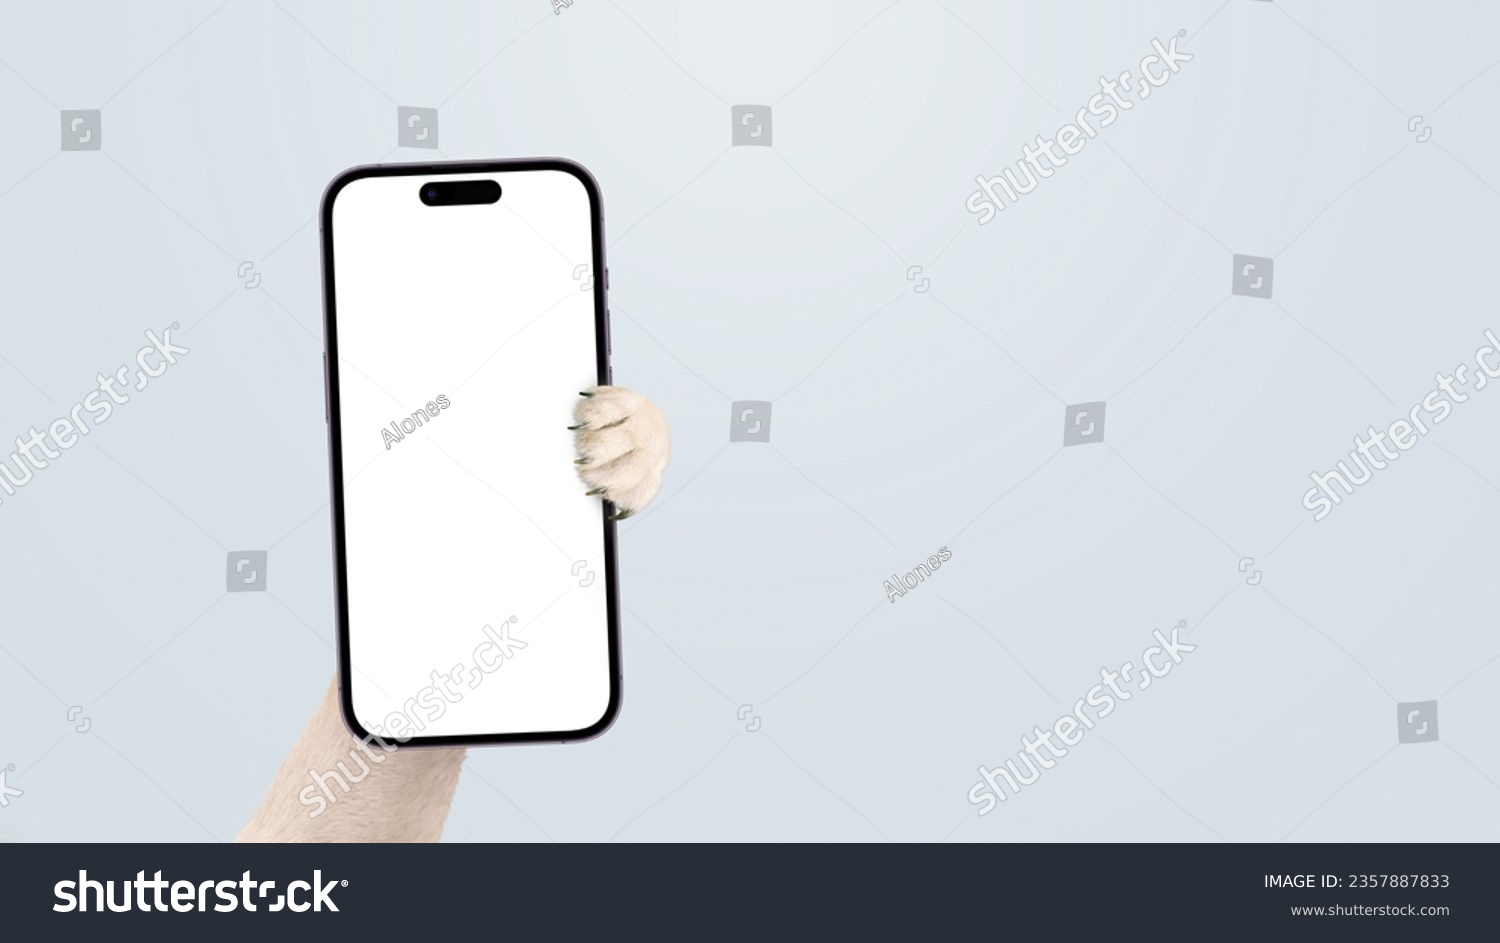 Dog paw holding smartphone mock up on isolated background. Smartphone, creative idea. Funny animal shows the phone #2357887833